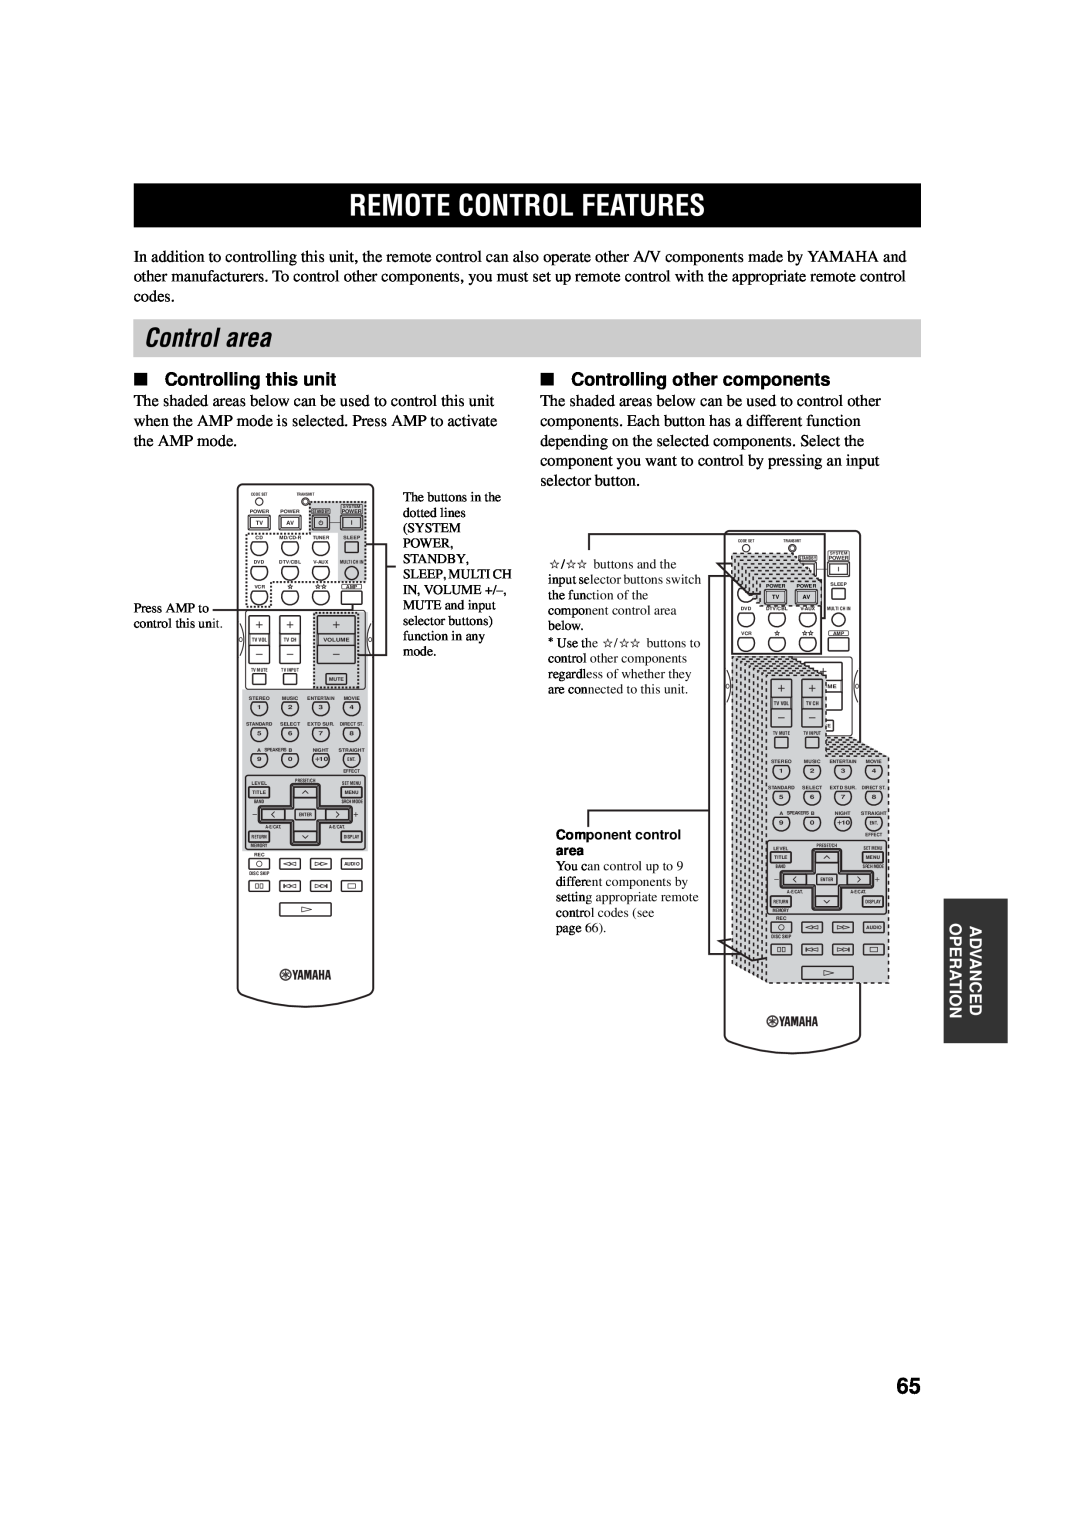 Yamaha AV Receiver owner manual Remote Control Features, Control area, Controlling this unit, Controlling other components 